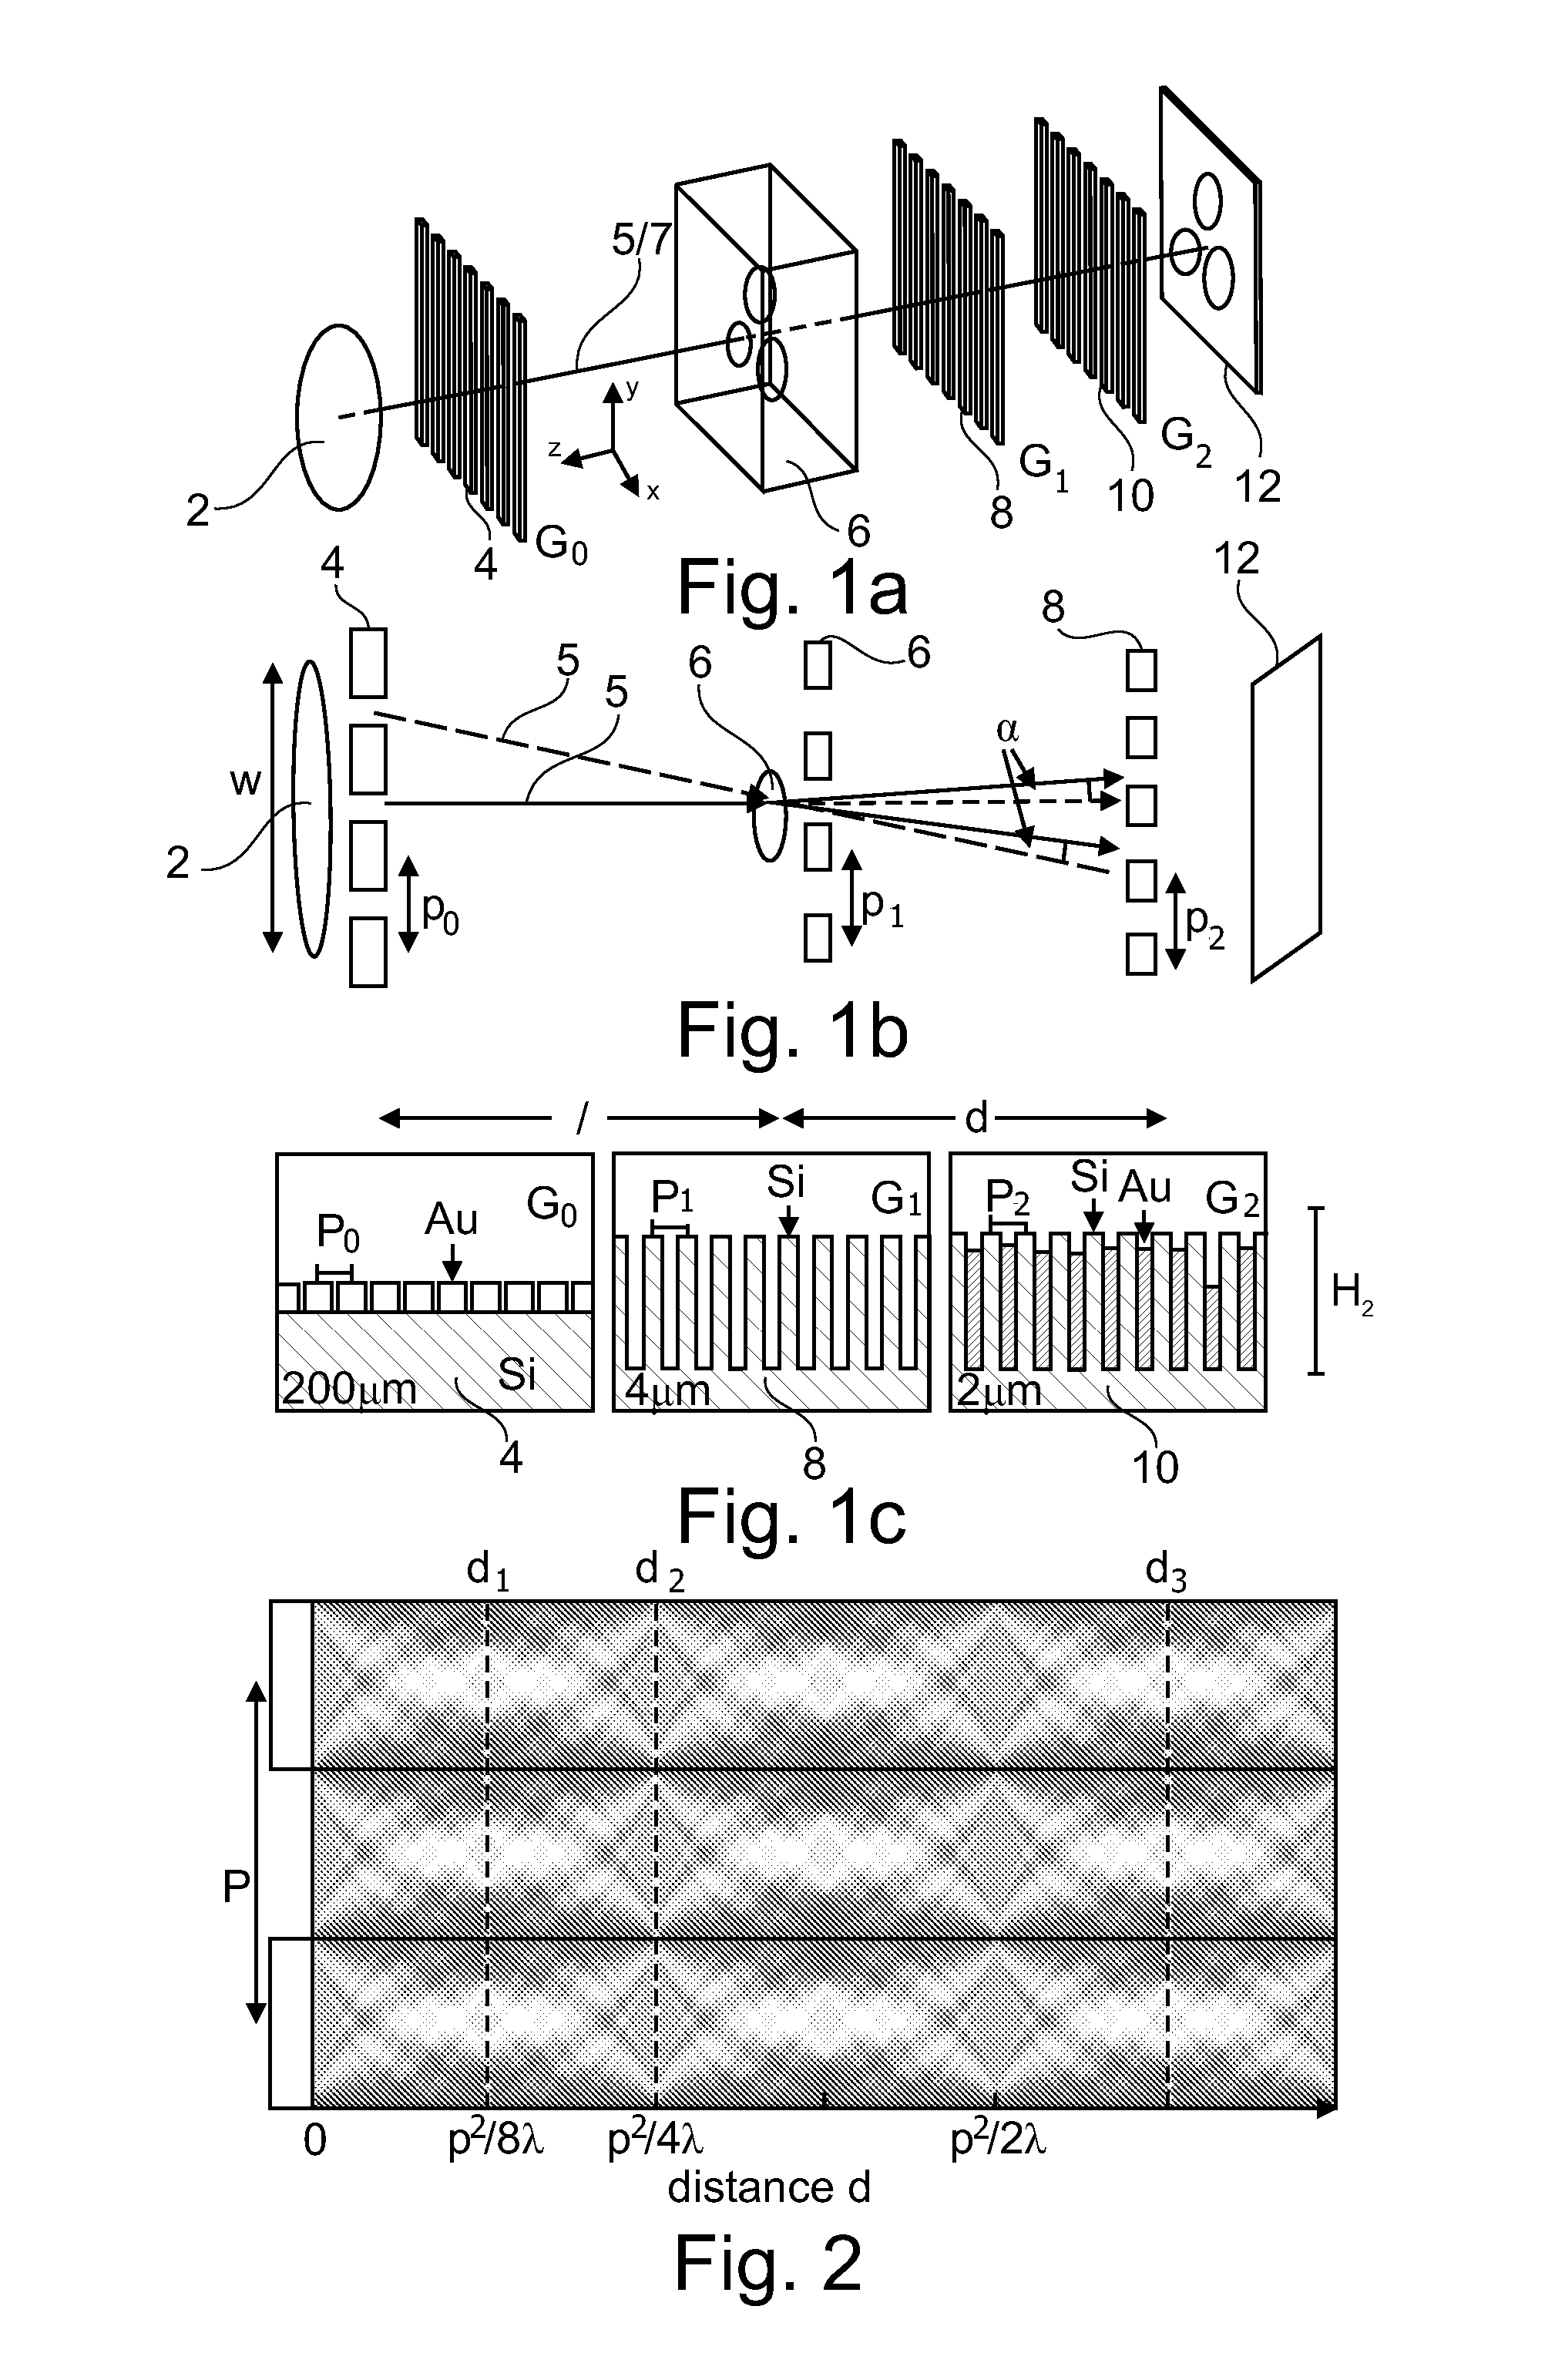 Non-parallel grating arrangement with on-the-fly phase stepping, x-ray system